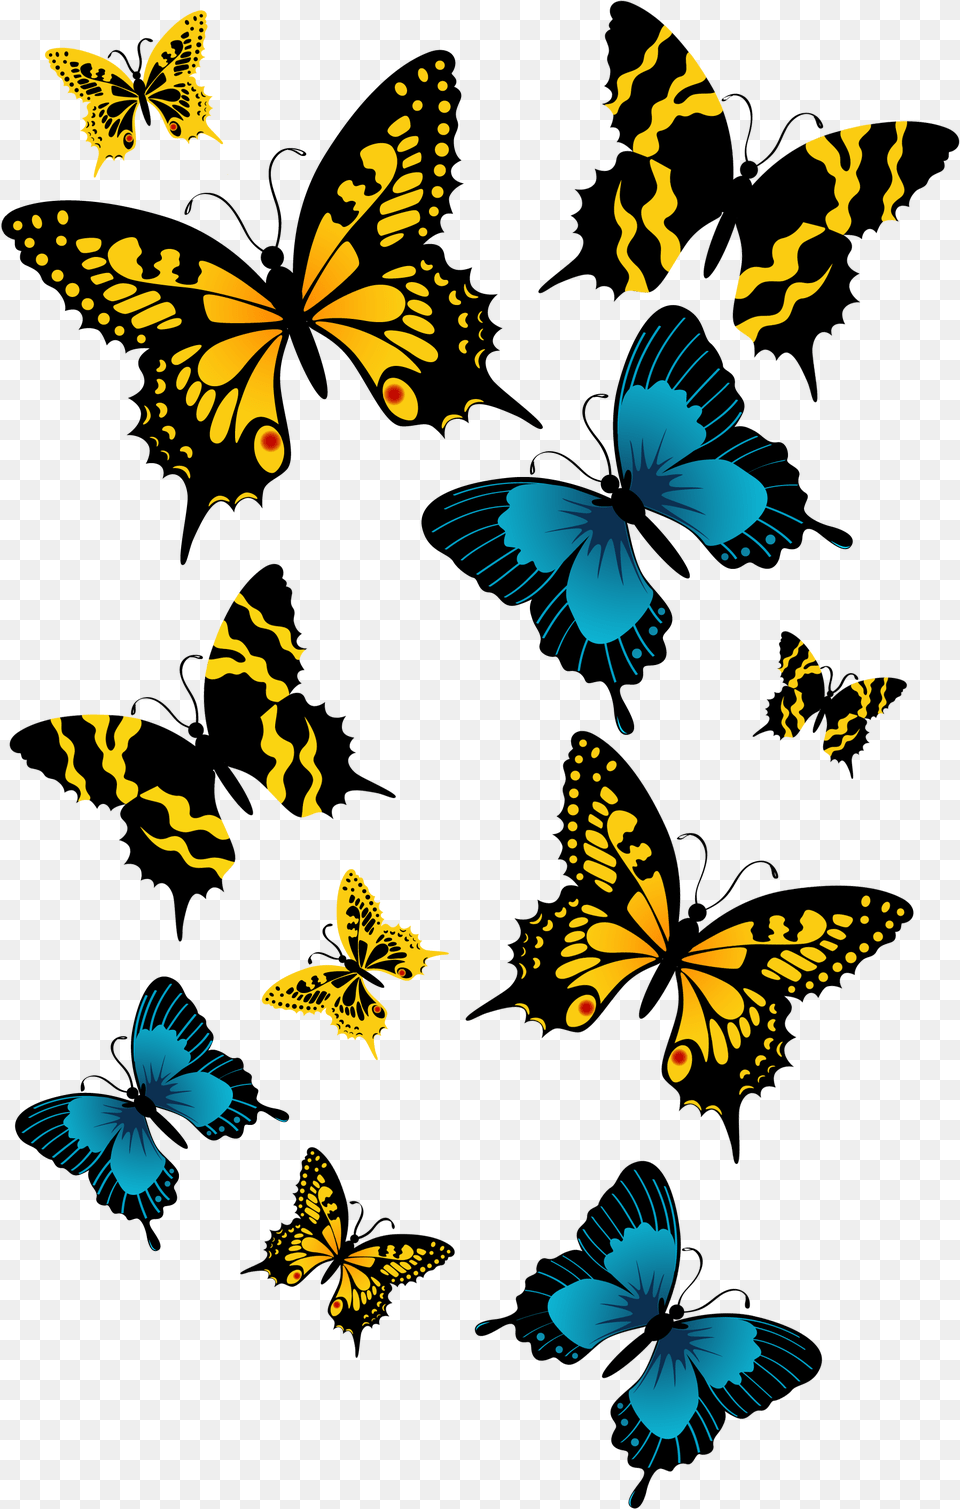 Butterflies High Quality Image Beautiful Hd Butterfly, Animal, Insect, Invertebrate, Monarch Png